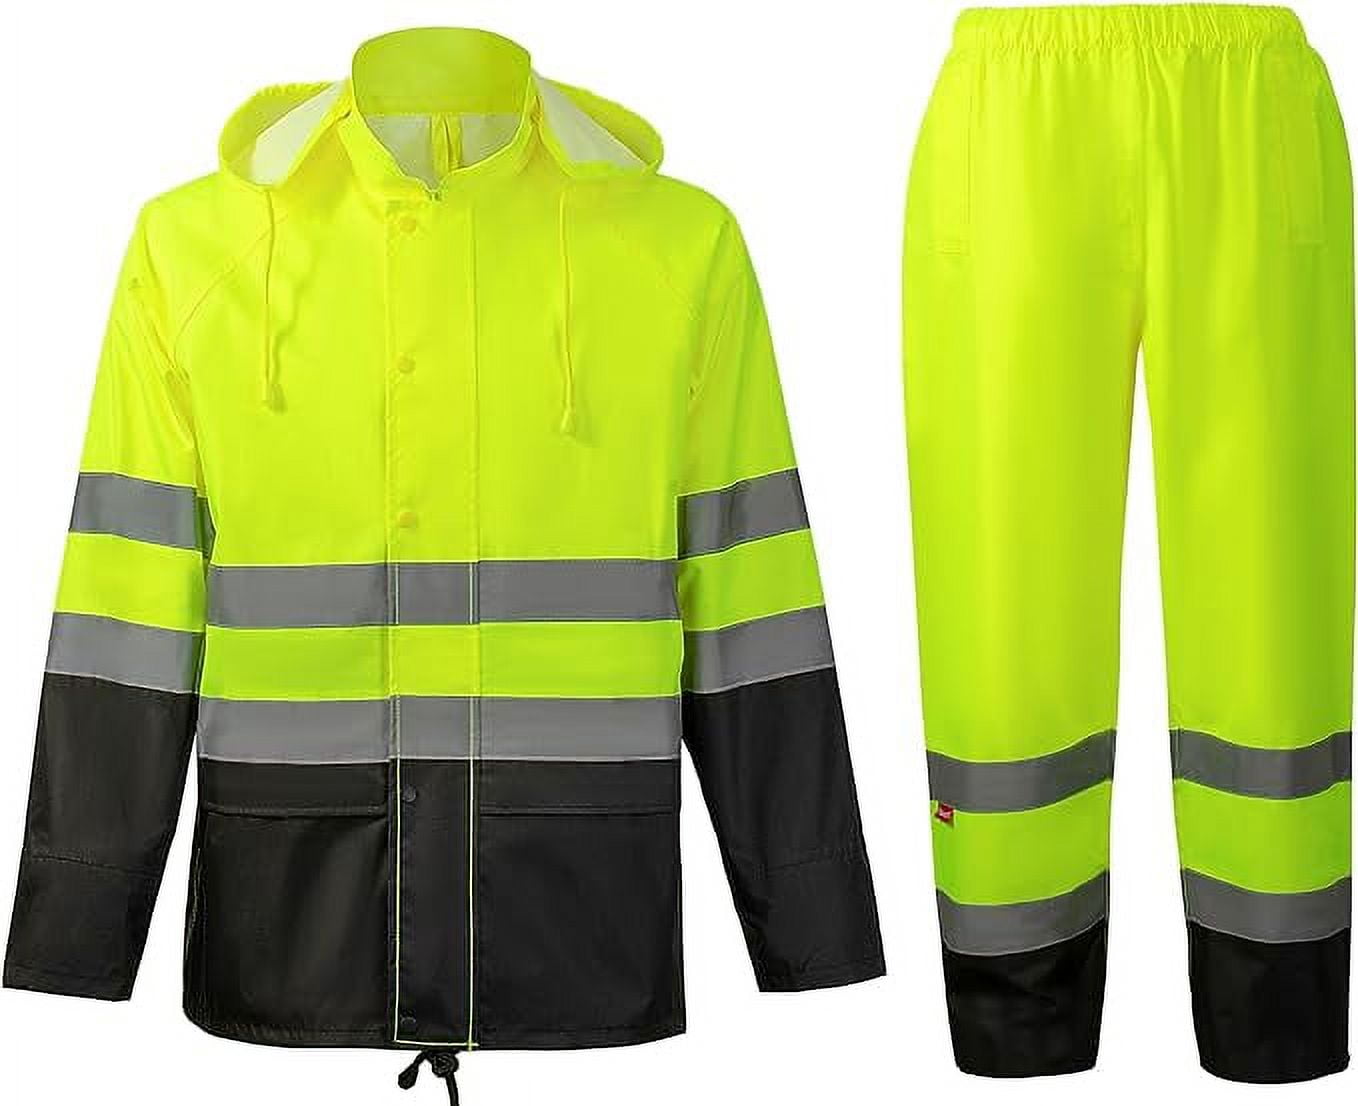 6X-Large Heavy Duty Yellow Rain Suit 3pc – .35mm PVC - by Xpose